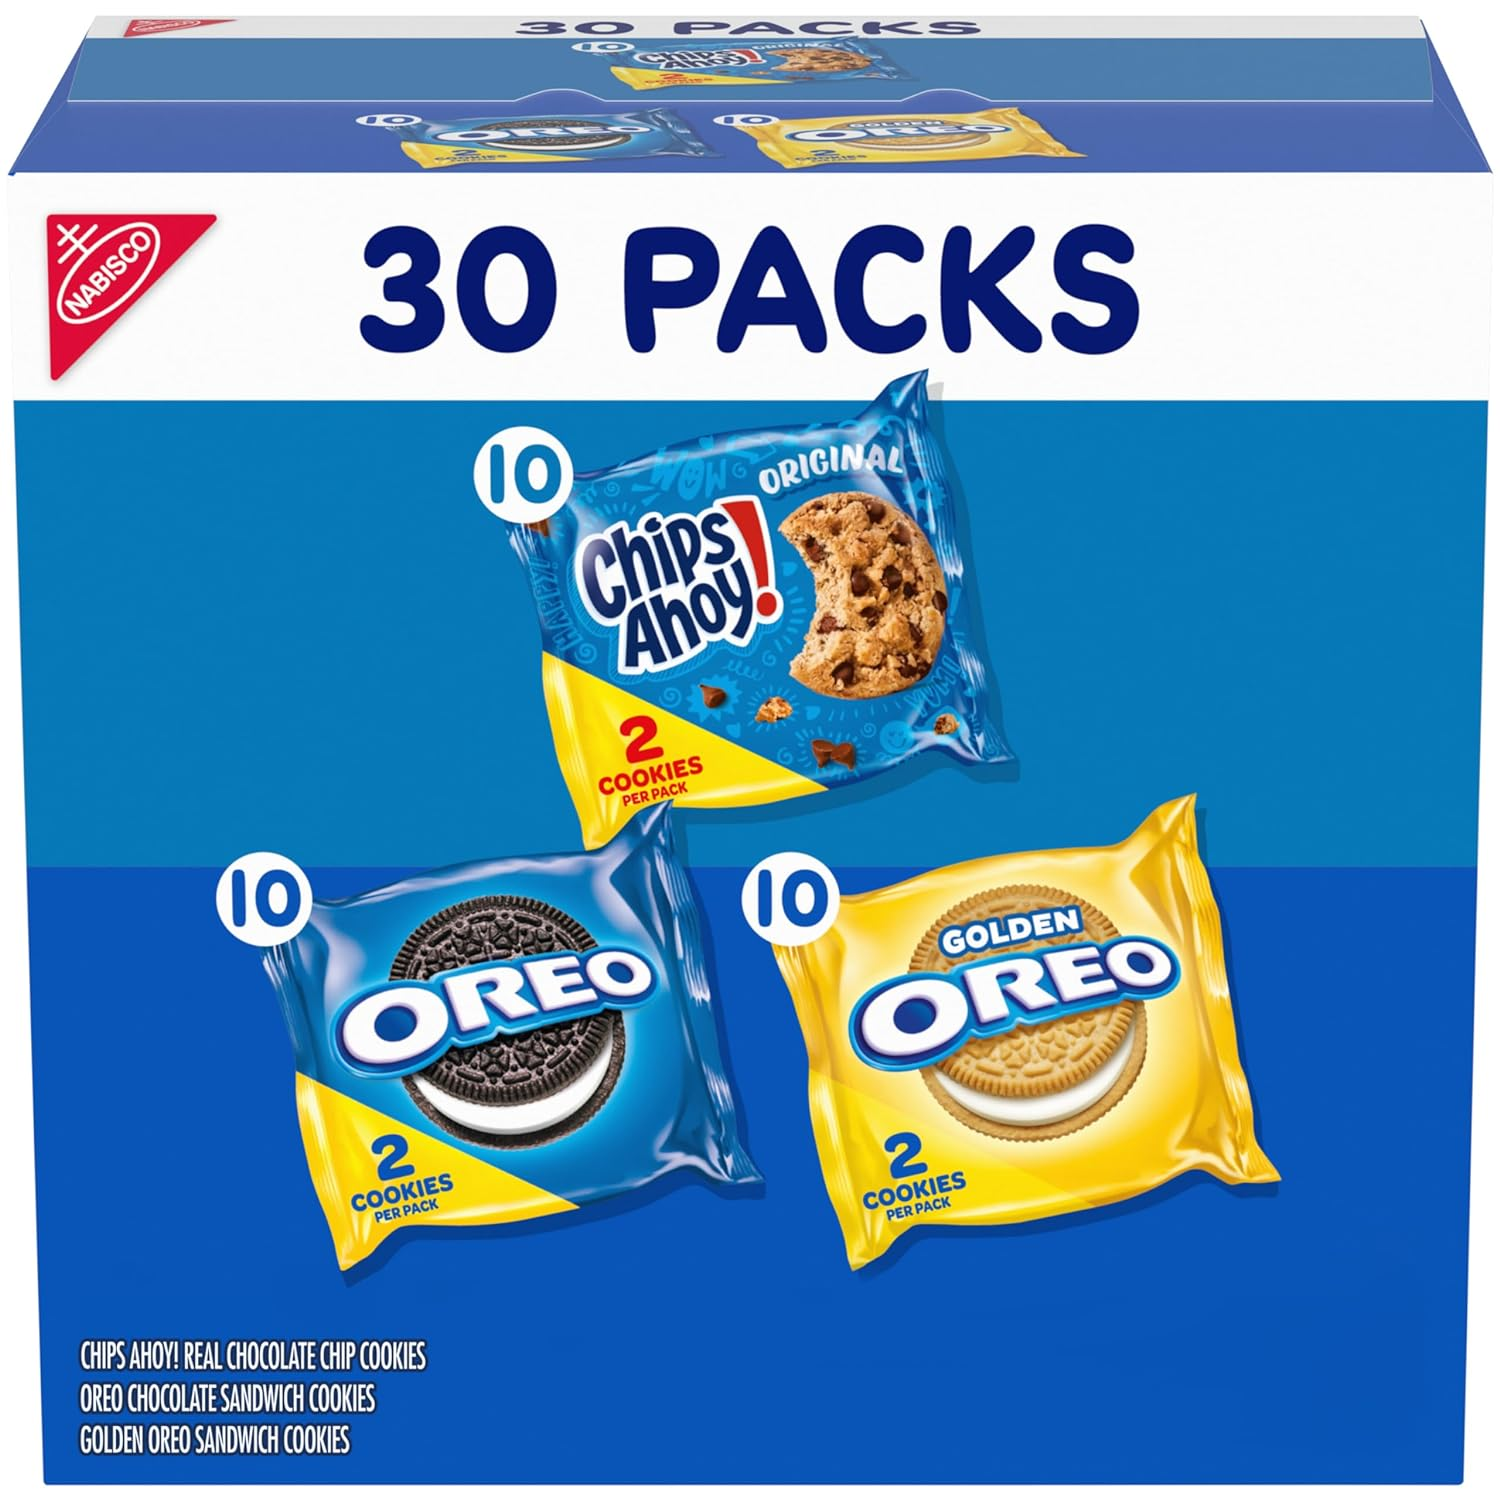 Amazon.com : Nabisco Sweet Treats Cookie Variety Pack OREO, OREO Golden & CHIPS AHOY!, 30 Snack Packs (2 Cookies Per Pack) : Everything Else $9.67